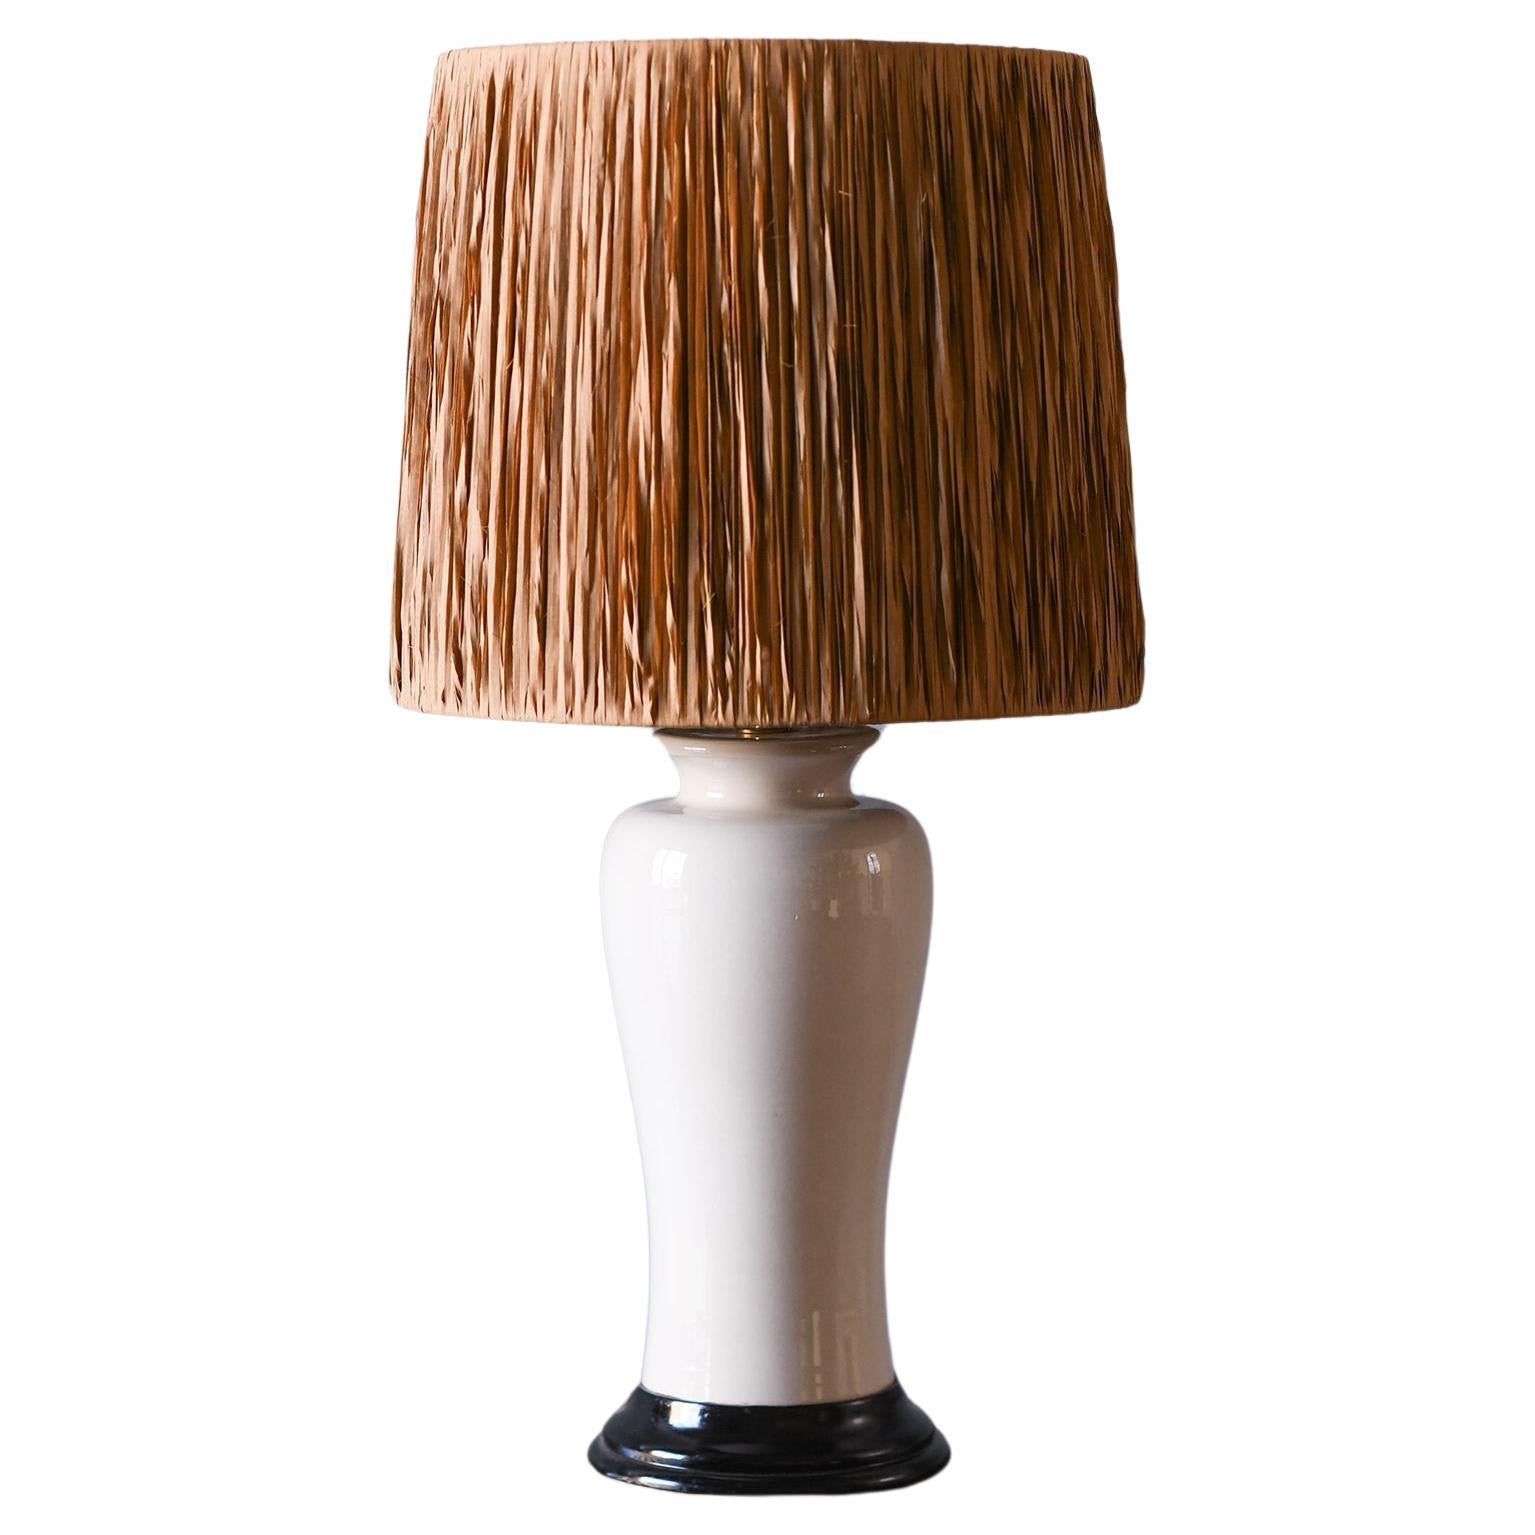 Tommaso Barbi table lamp in ceramic complete with raffia lampshade